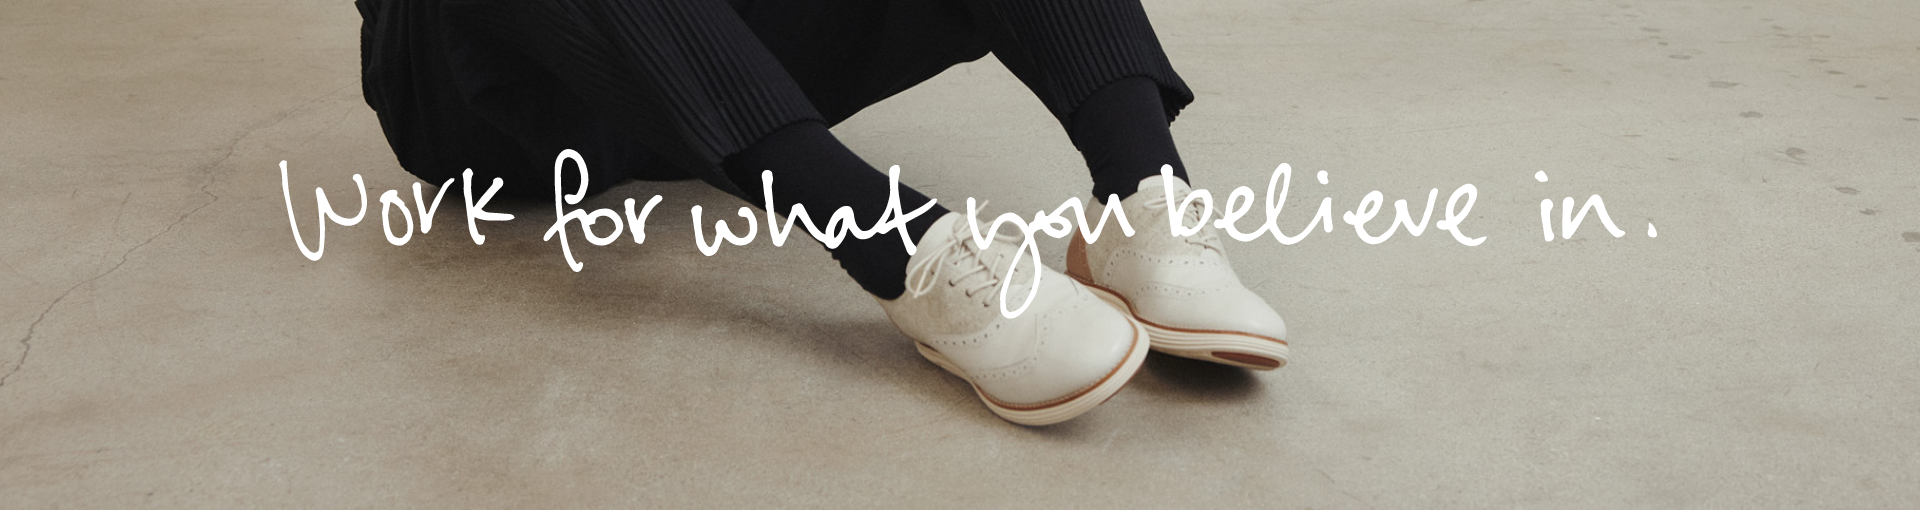 Cole Haan Promotional Banner